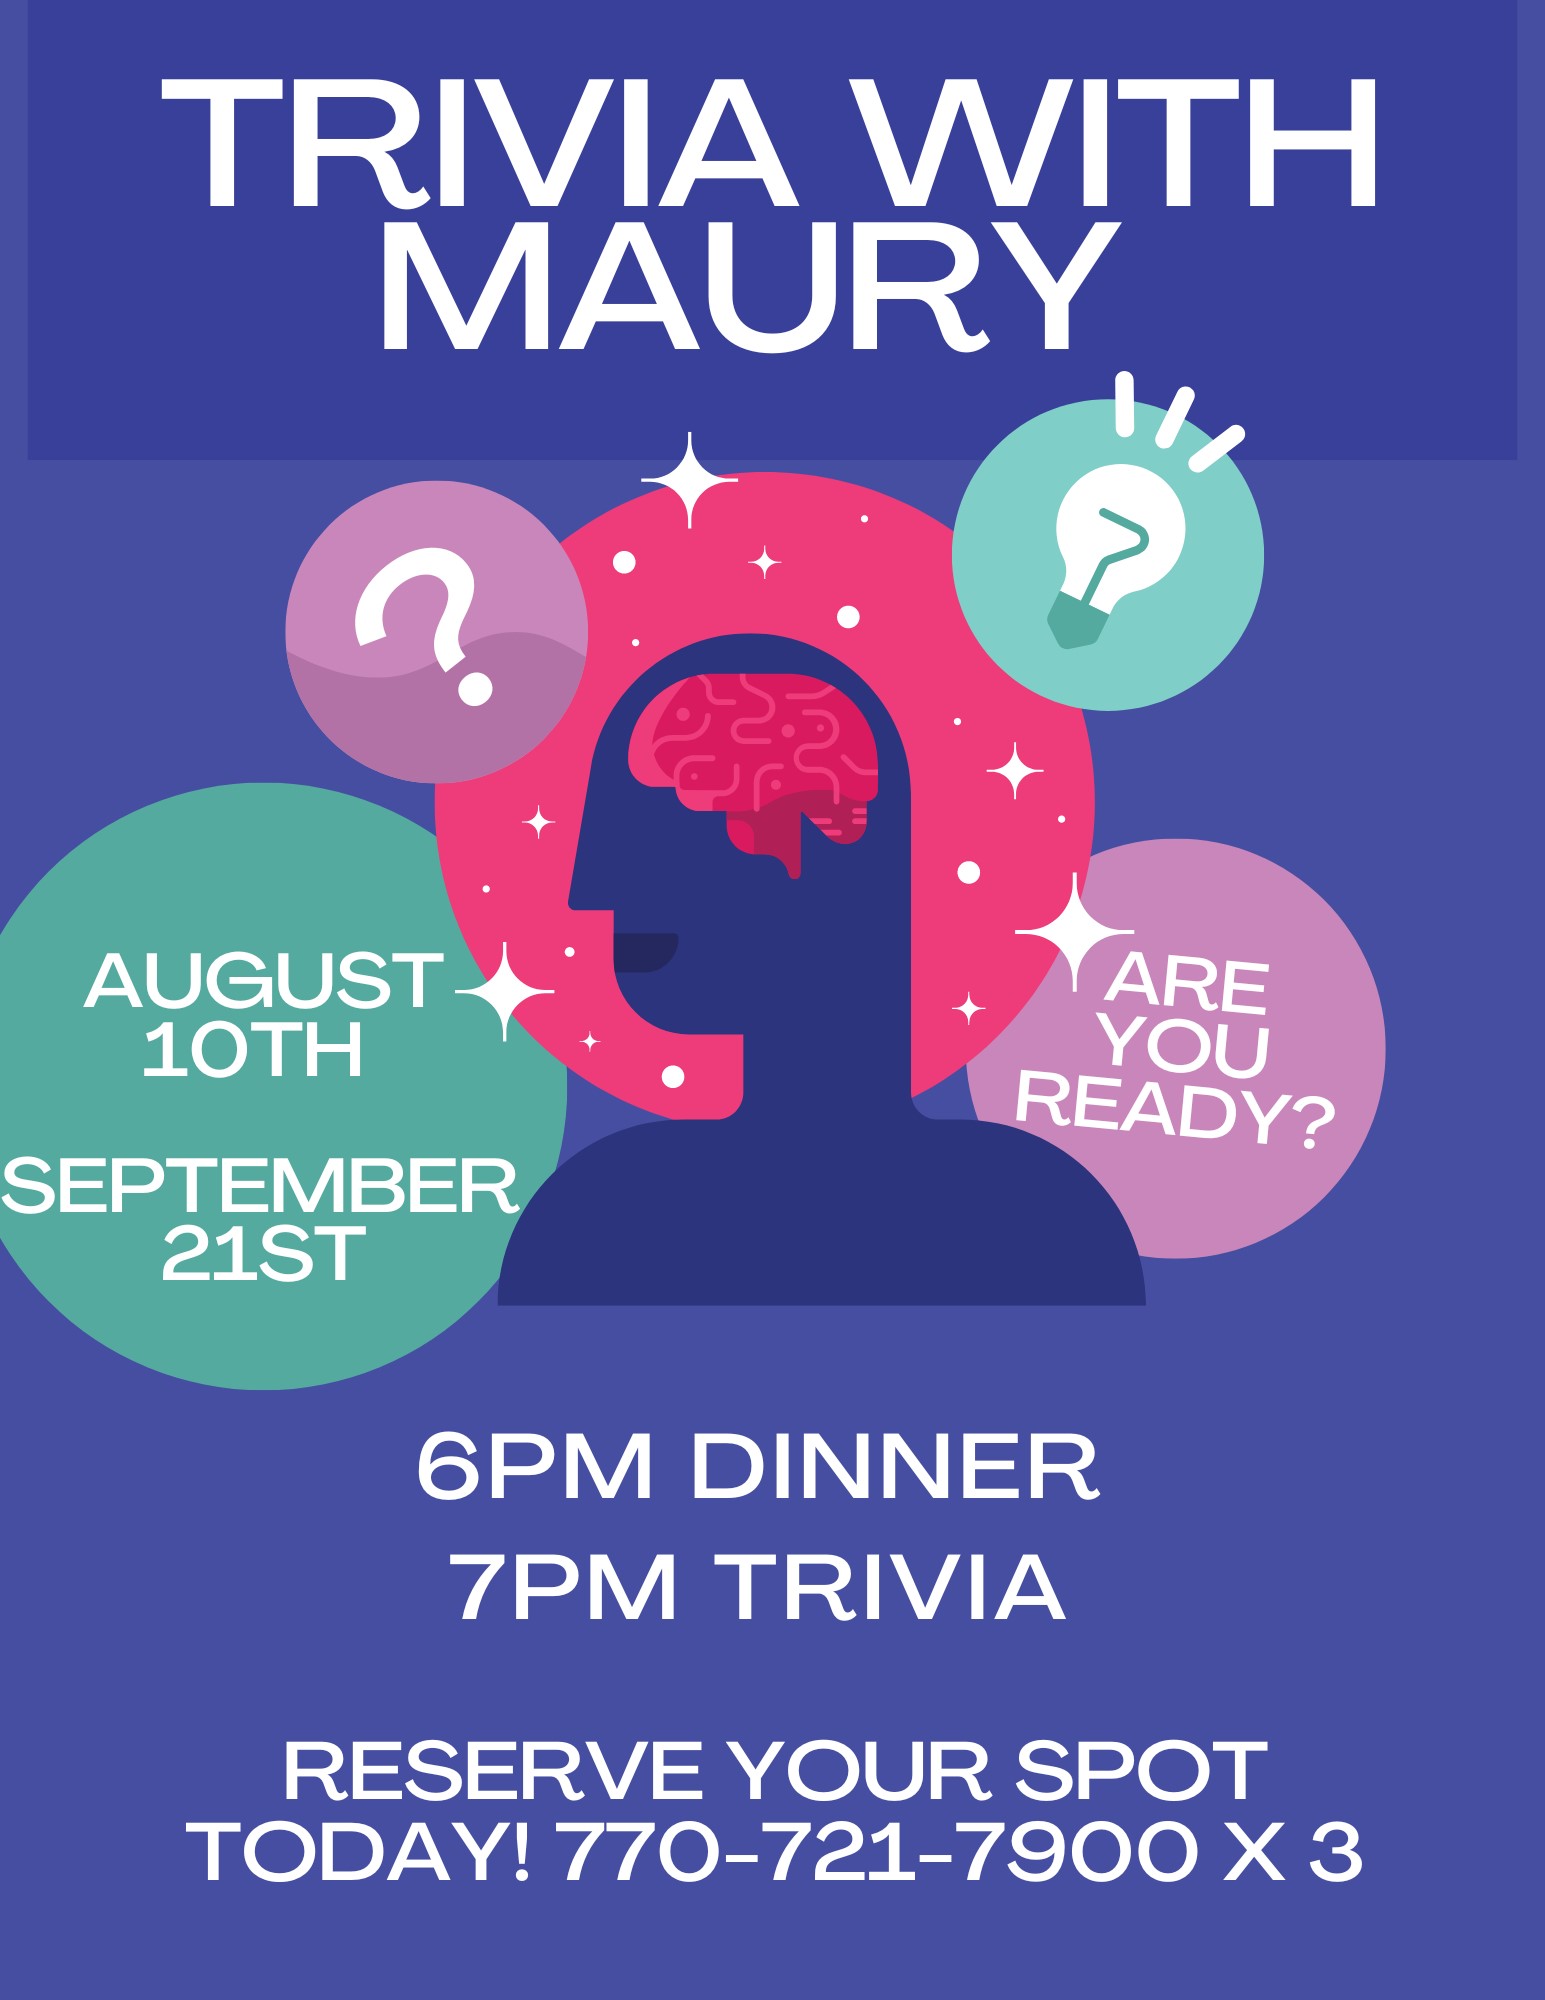 trivia with maury sept. 21